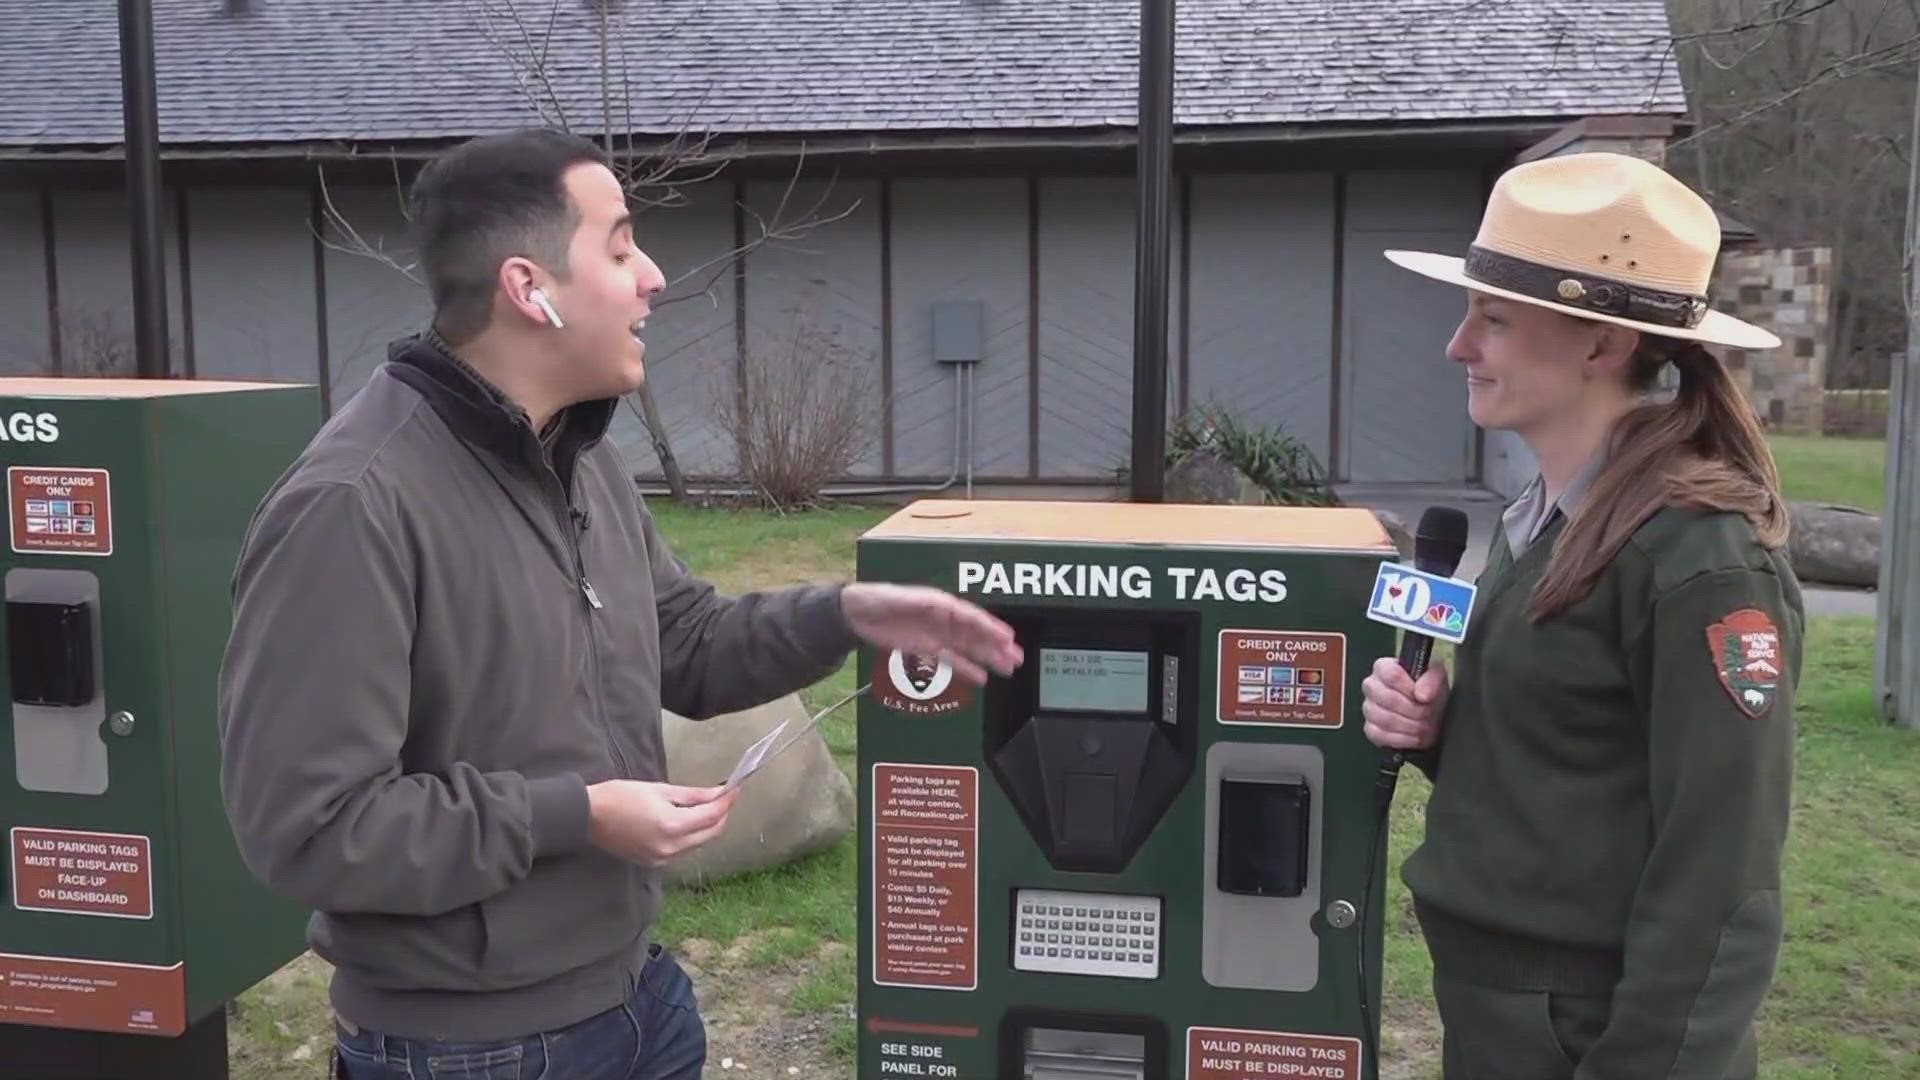 The Park It Forward program requires visitors to have a parking tag to leave their car anywhere in the park for more than 15 minutes starting March 1, 2023.